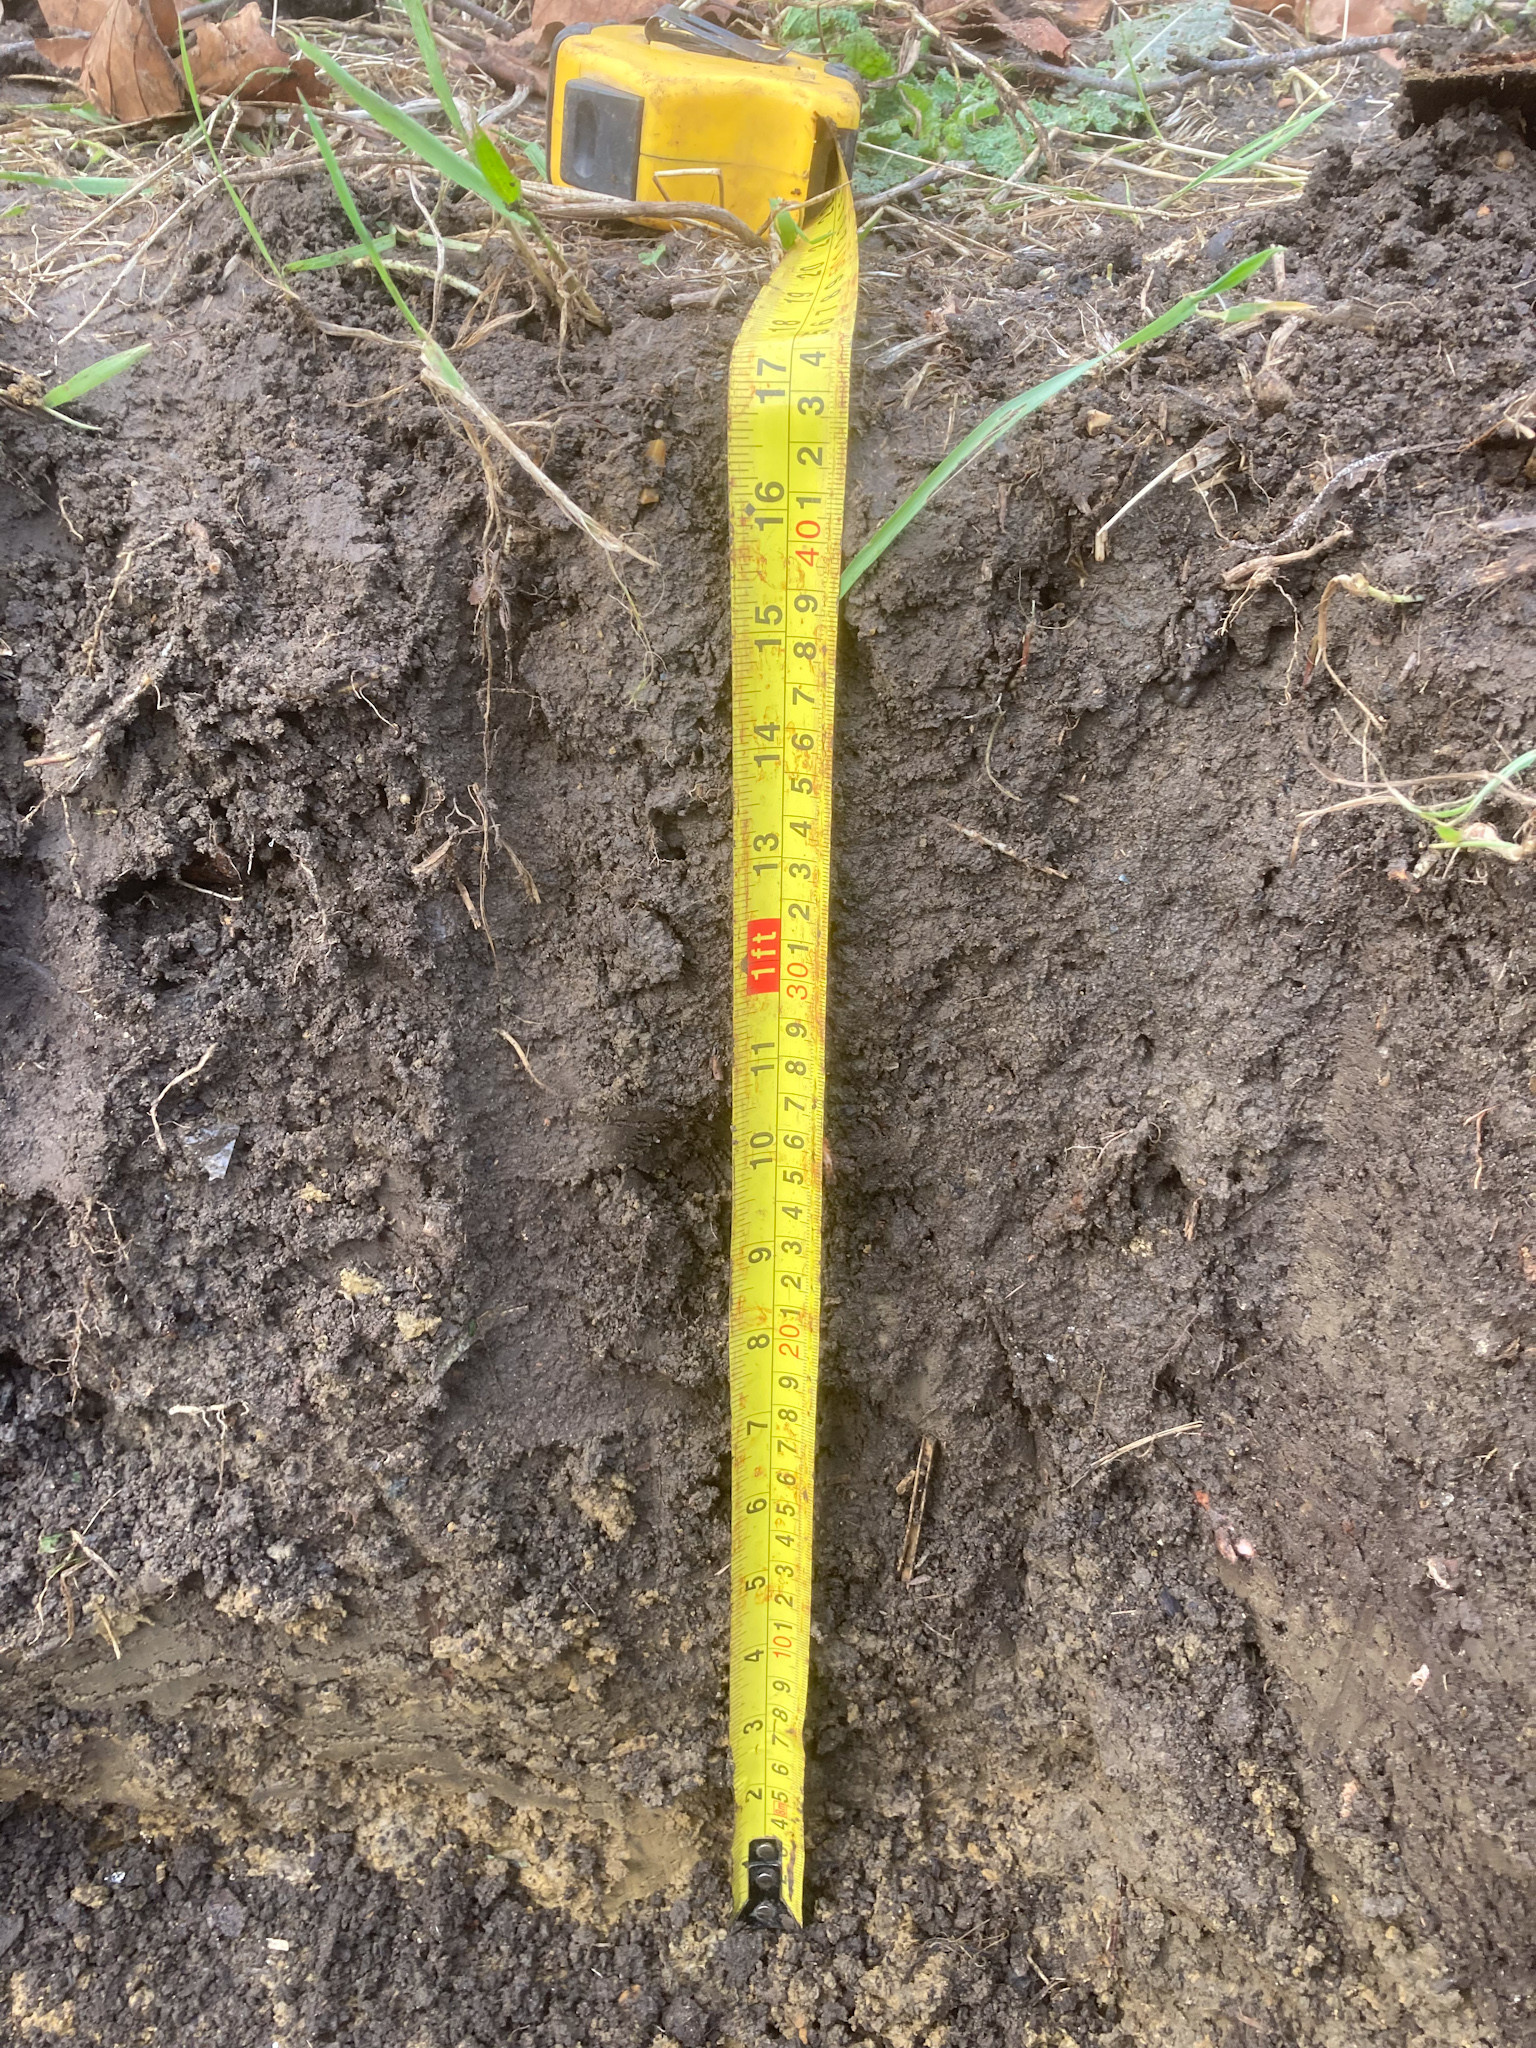 A whole dug on a no dig allotment plot with a tape measure going down to about 44 cm or over 17 inches. The good soil layer is approximately 39 cm or 15 inches deep before the clay layer begins.